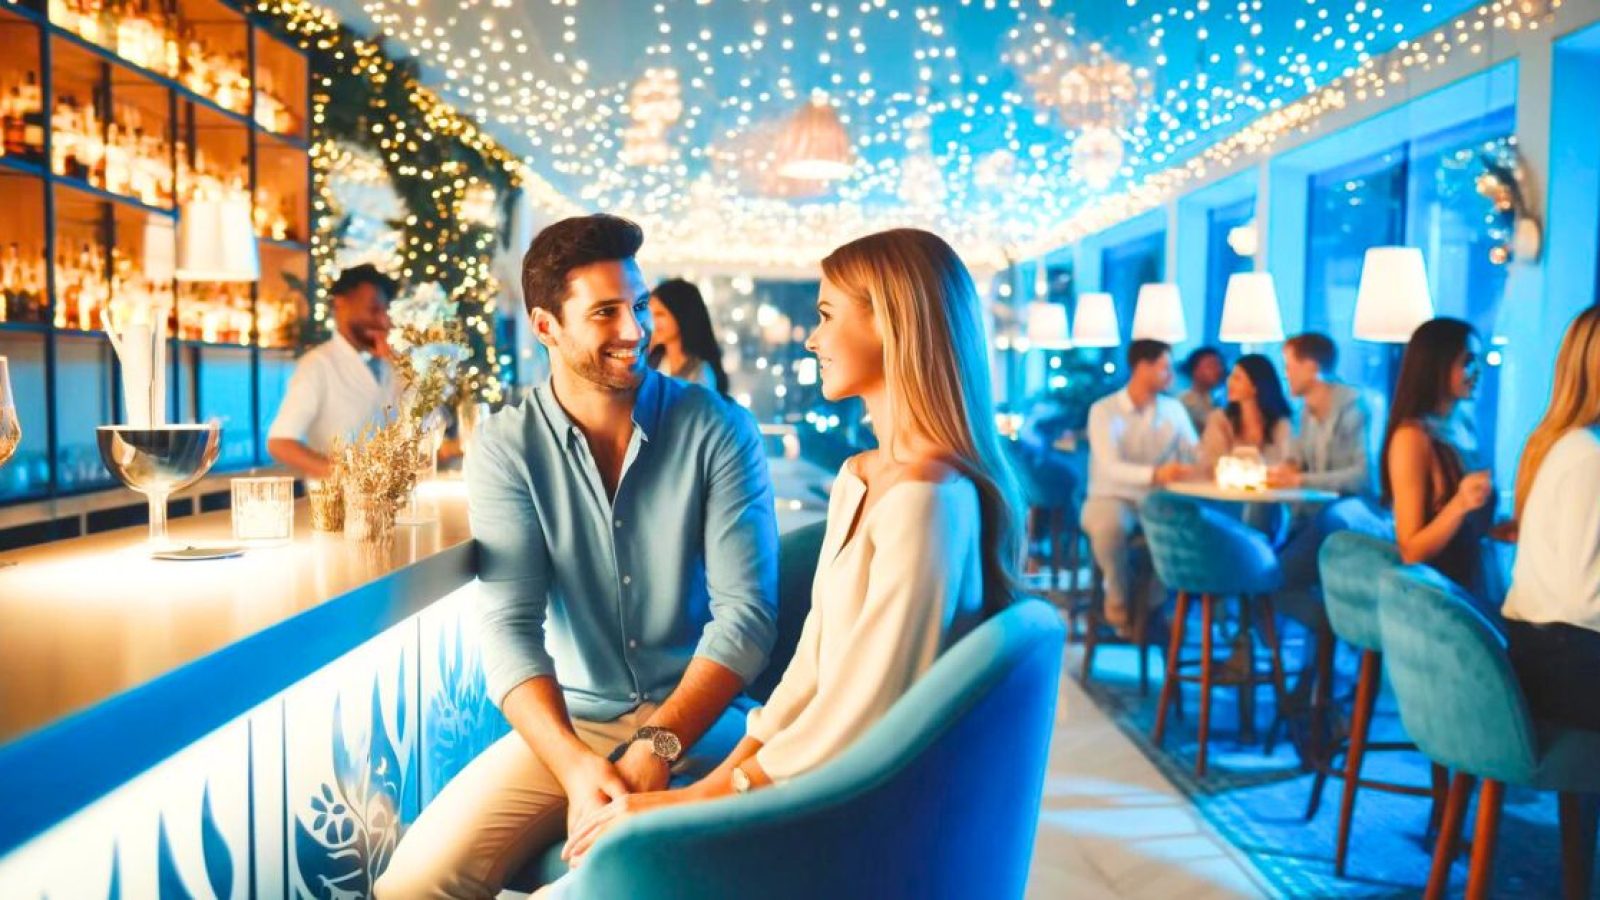 man and woman on a fast date at a singles event in a bar